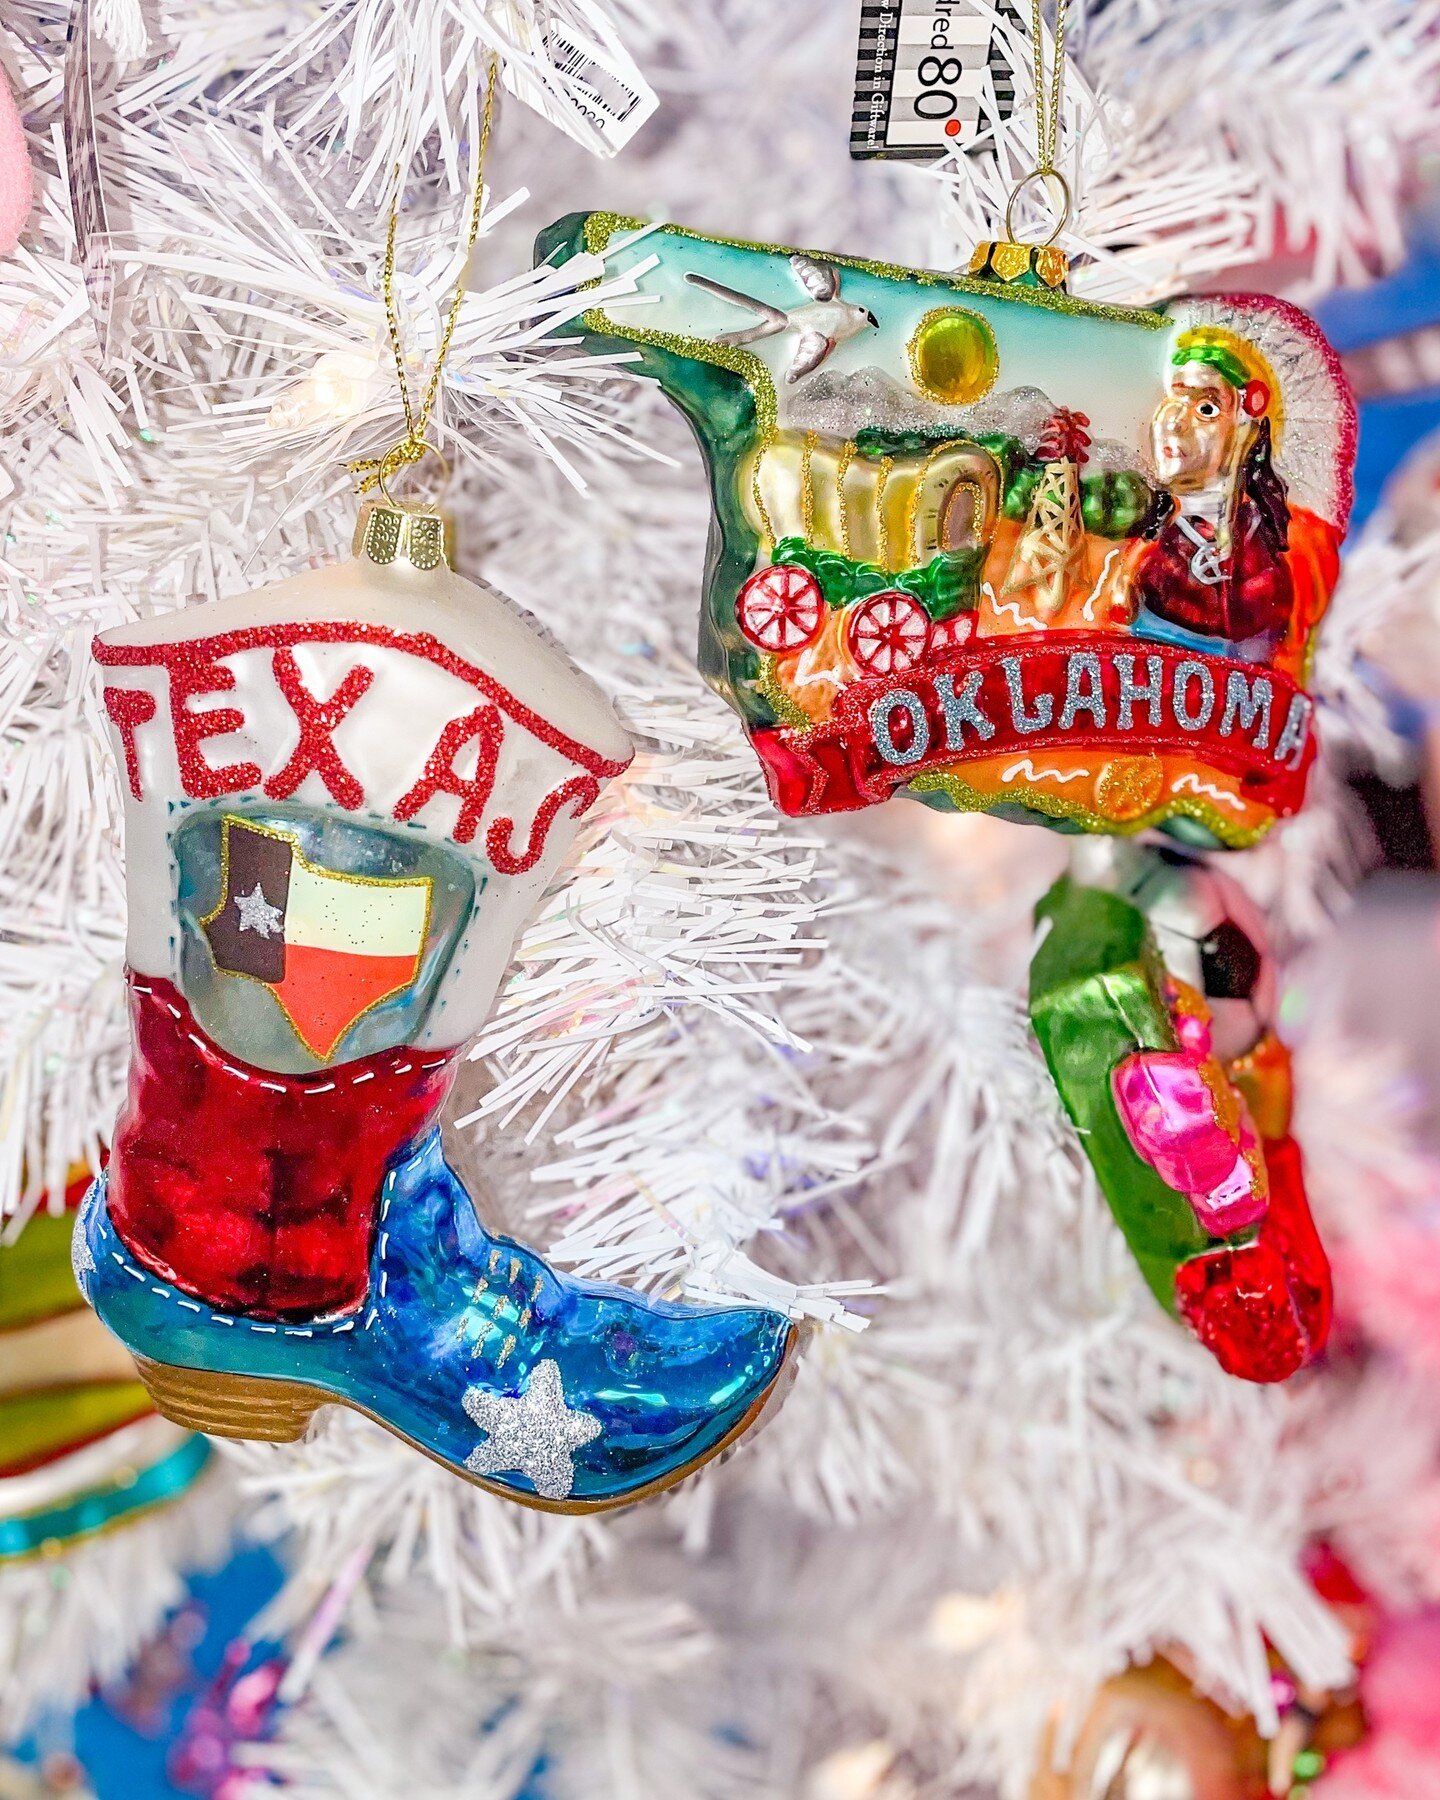 The ultimate rivalry. Show your state pride with these beautiful glass ornaments. They are great for ornament exchanges, or gifting to your favorite Texan or Oklahoman.⁠
⁠
Tap the tag to shop. 🧡🎄